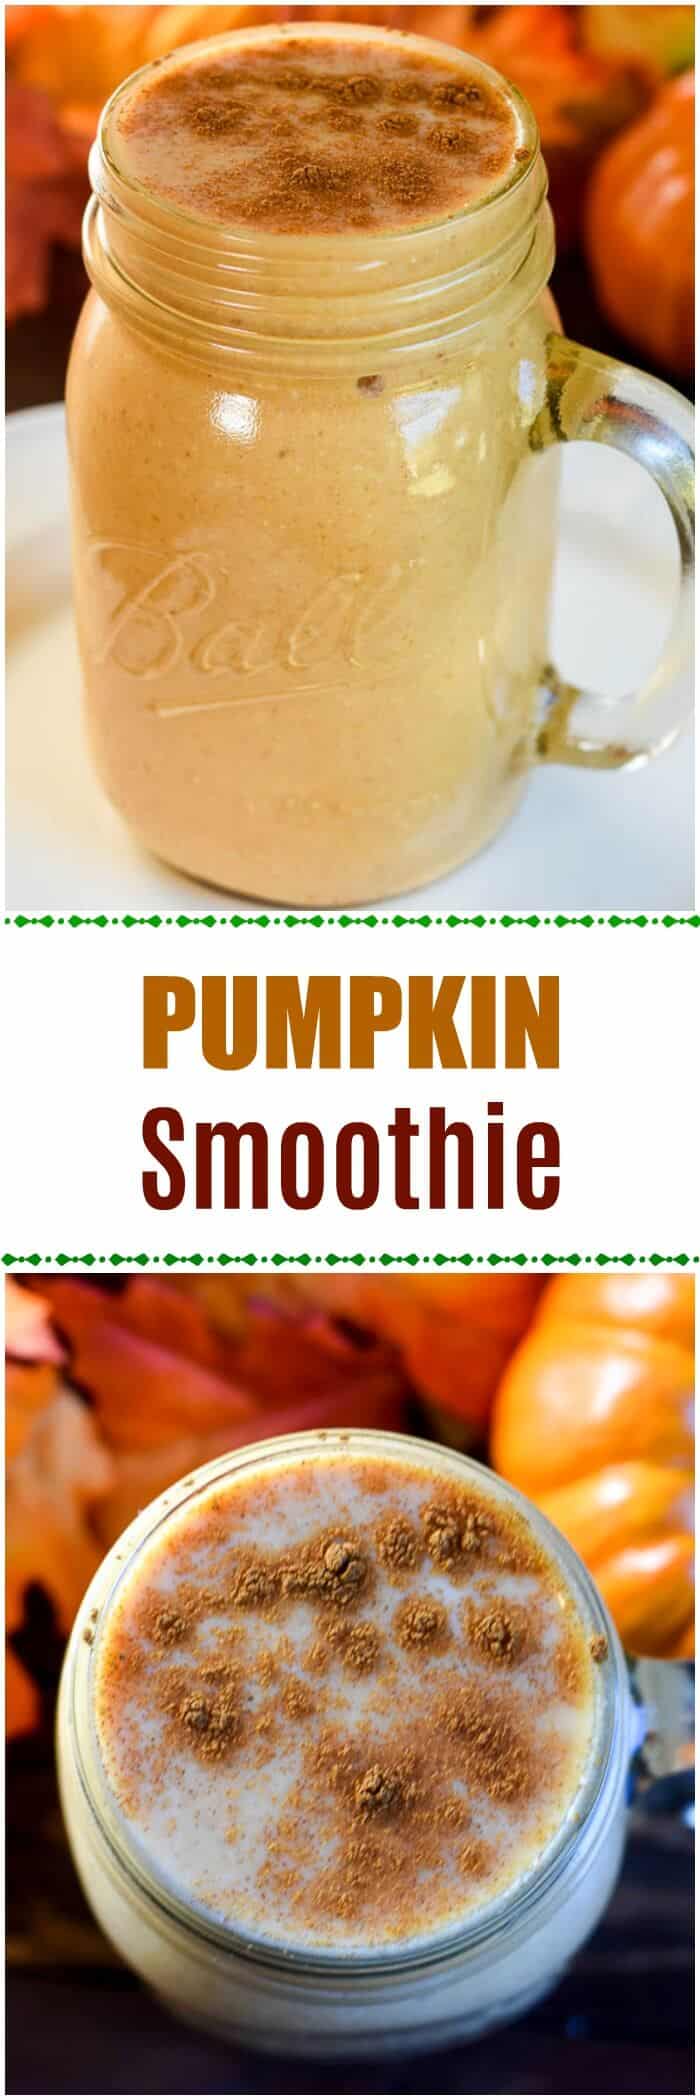 Pumpkin Smoothie with an optional spicy Texas twist